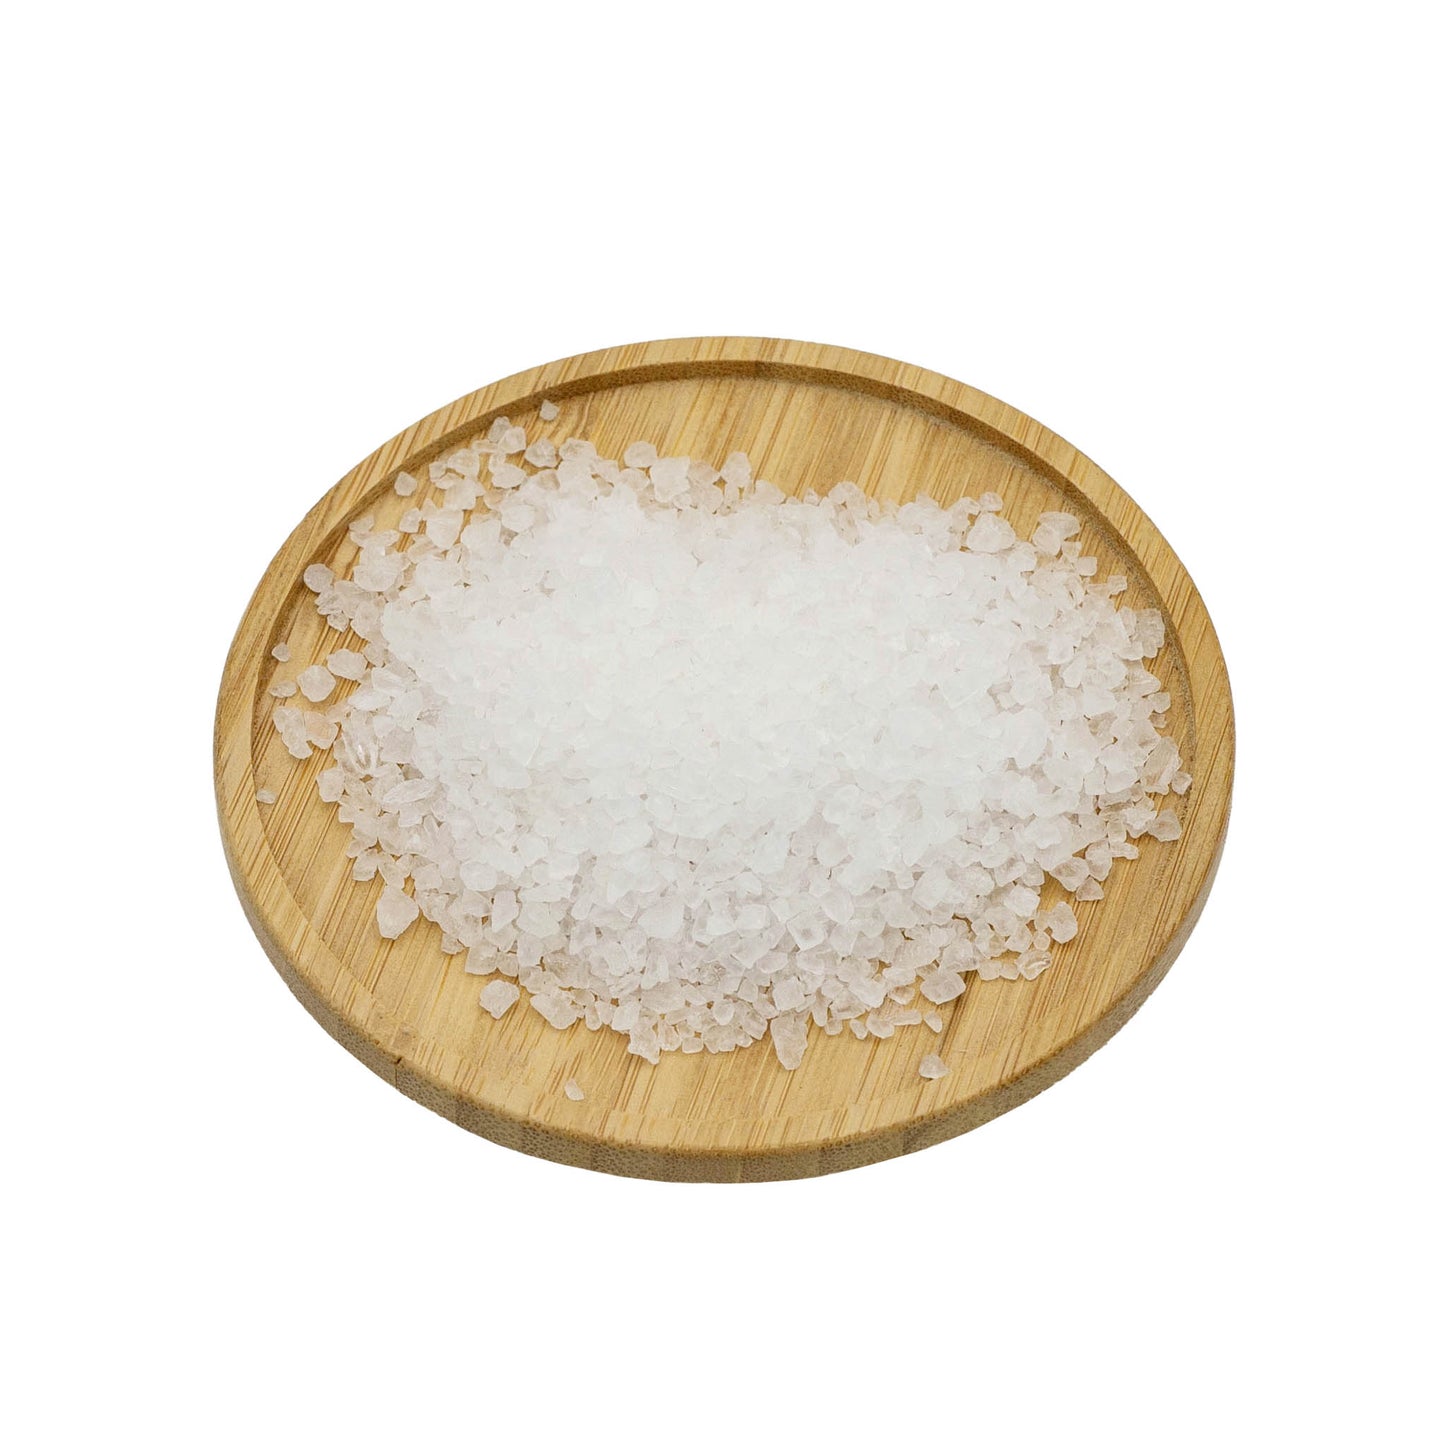 Non-iodised course sea salt for curing and preserving. 